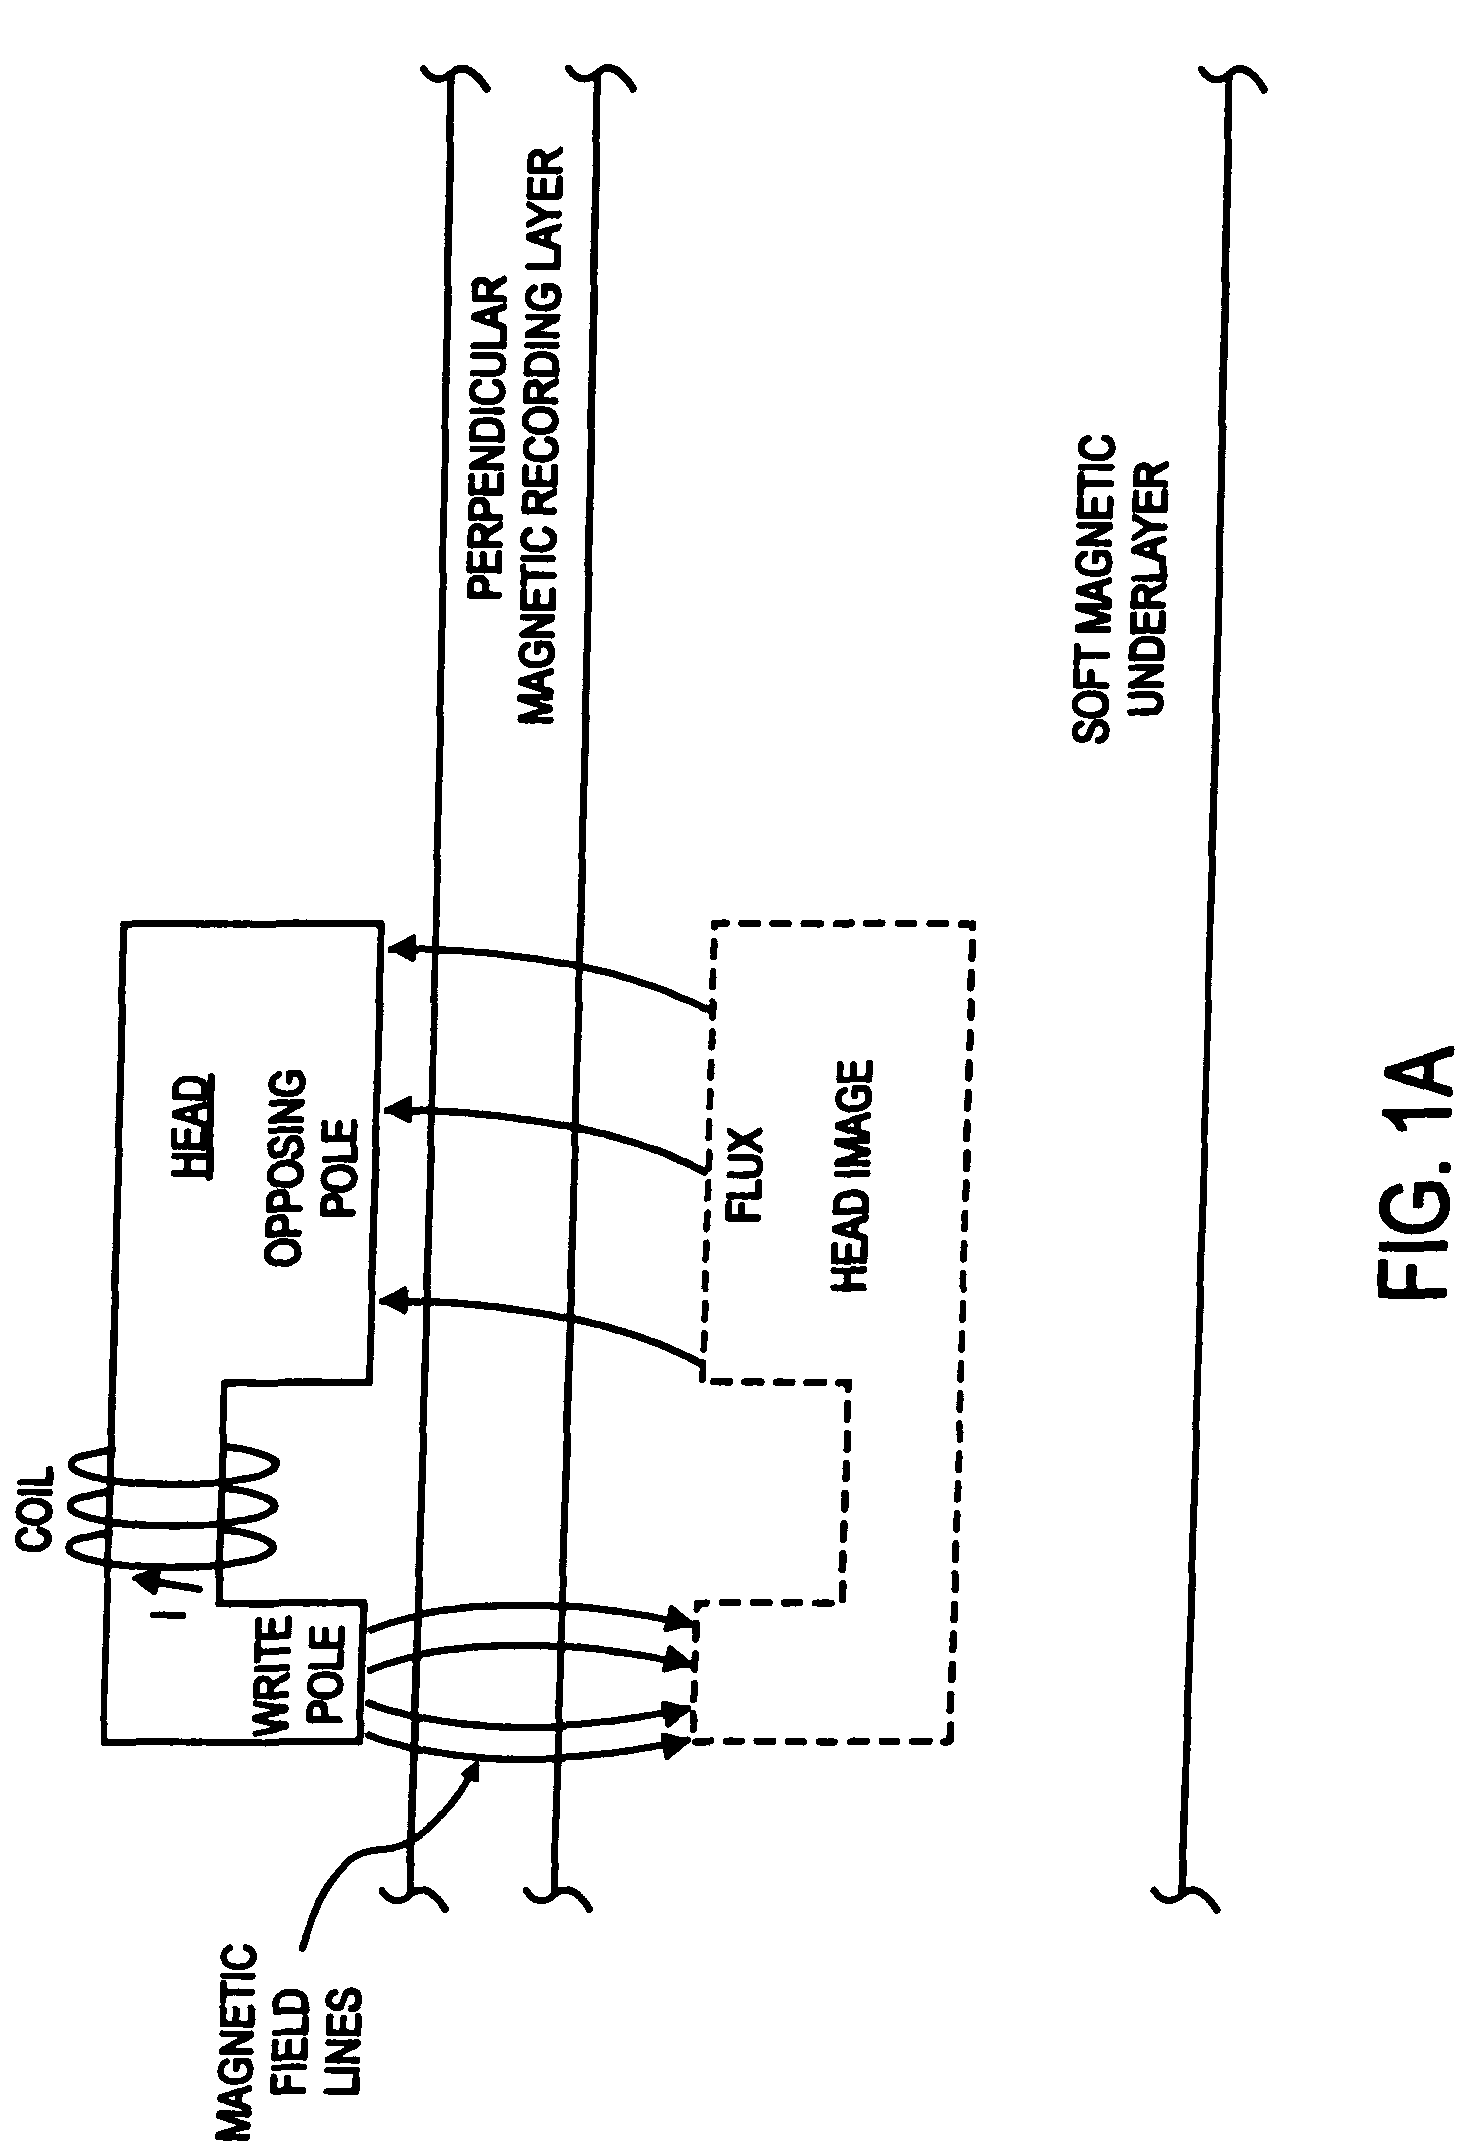 Radial magnetic field reset system for producing single domain soft magnetic underlayer on perpendicular magnetic recording medium